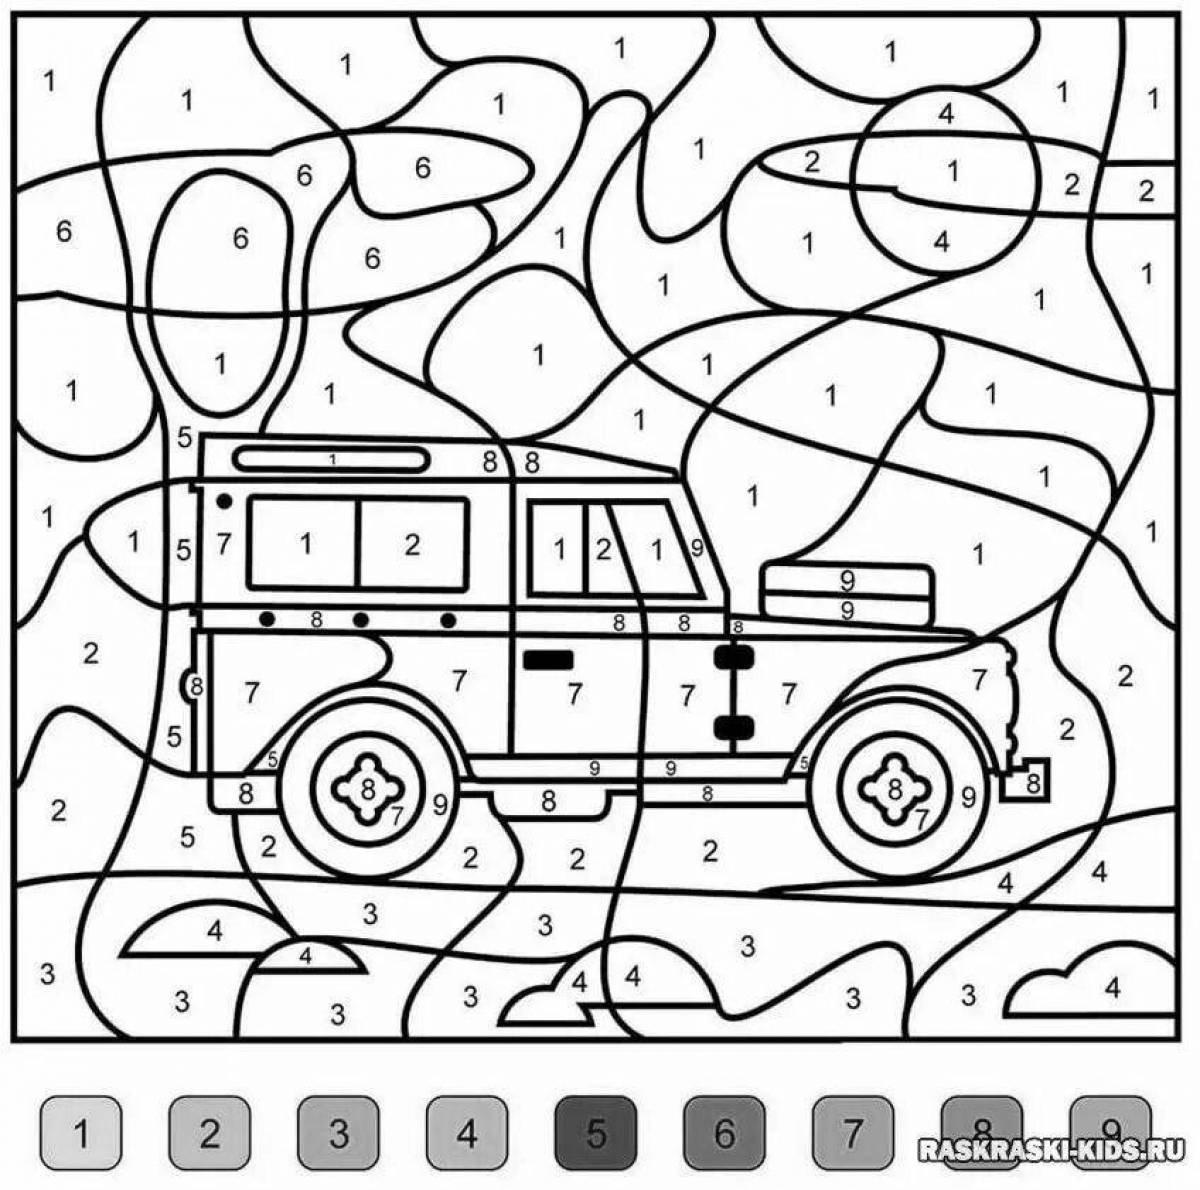 Entertaining coloring for boys educational